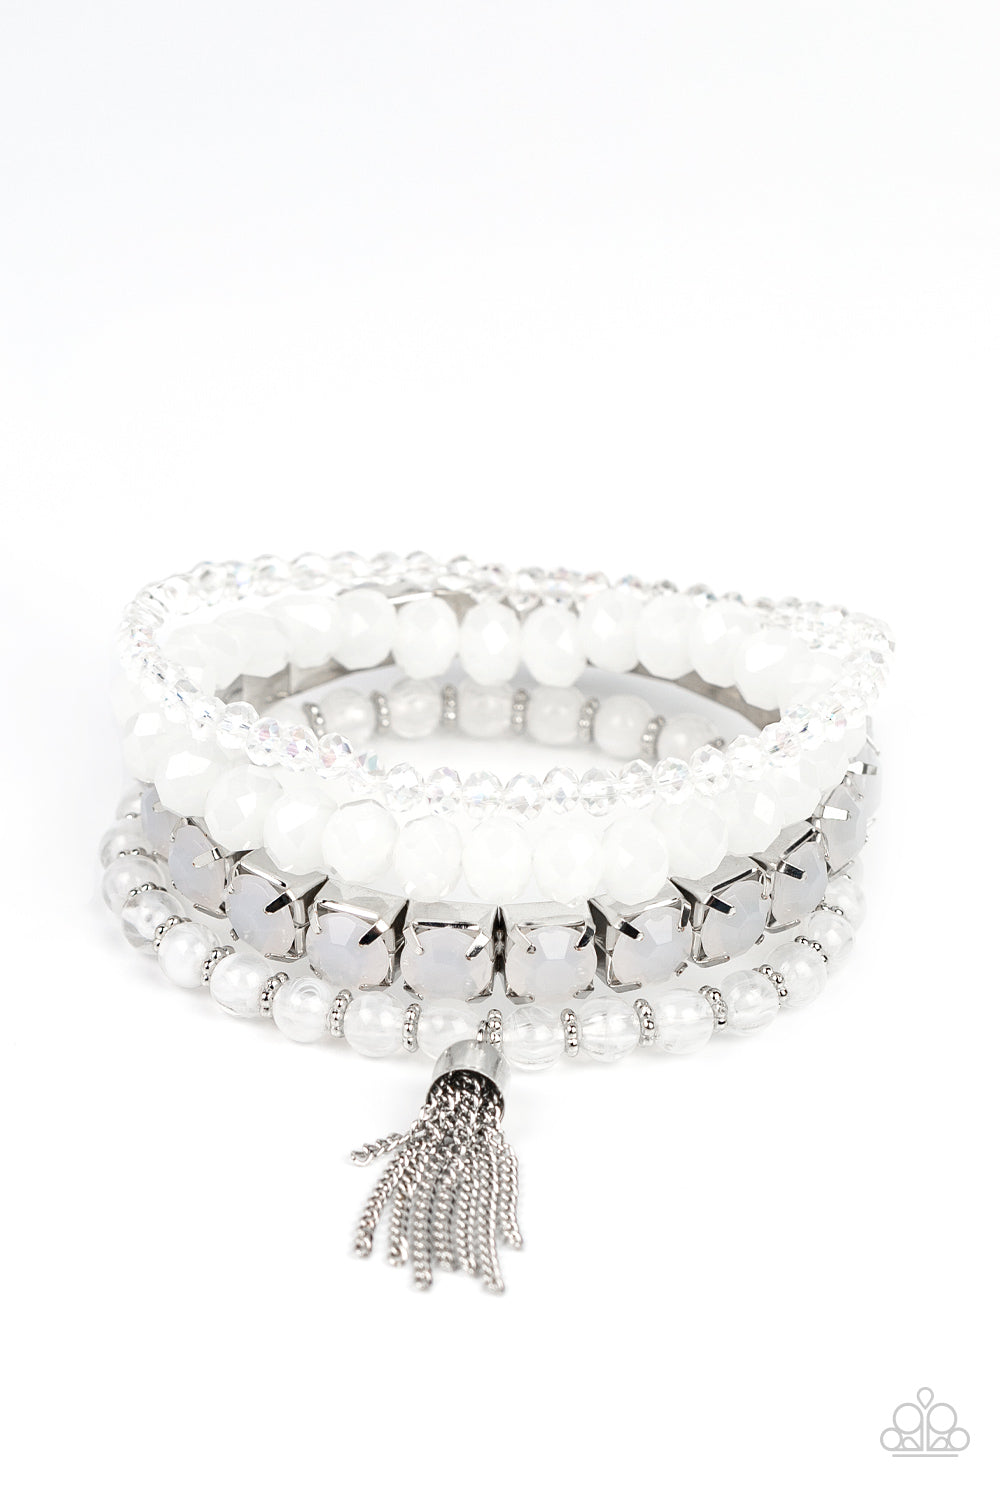 Day Trip Trinket White Bracelet - Paparazzi Accessories  Pinched in silver fittings, a stretchy band of dewy white beads joins mismatched strands of cloudy and glassy white crystal-like and stretchy bracelets around the wrist. A single silver chain tassel dances from the crystalline compilation for a final flirty finesse.  Sold as one set of four bracelets.